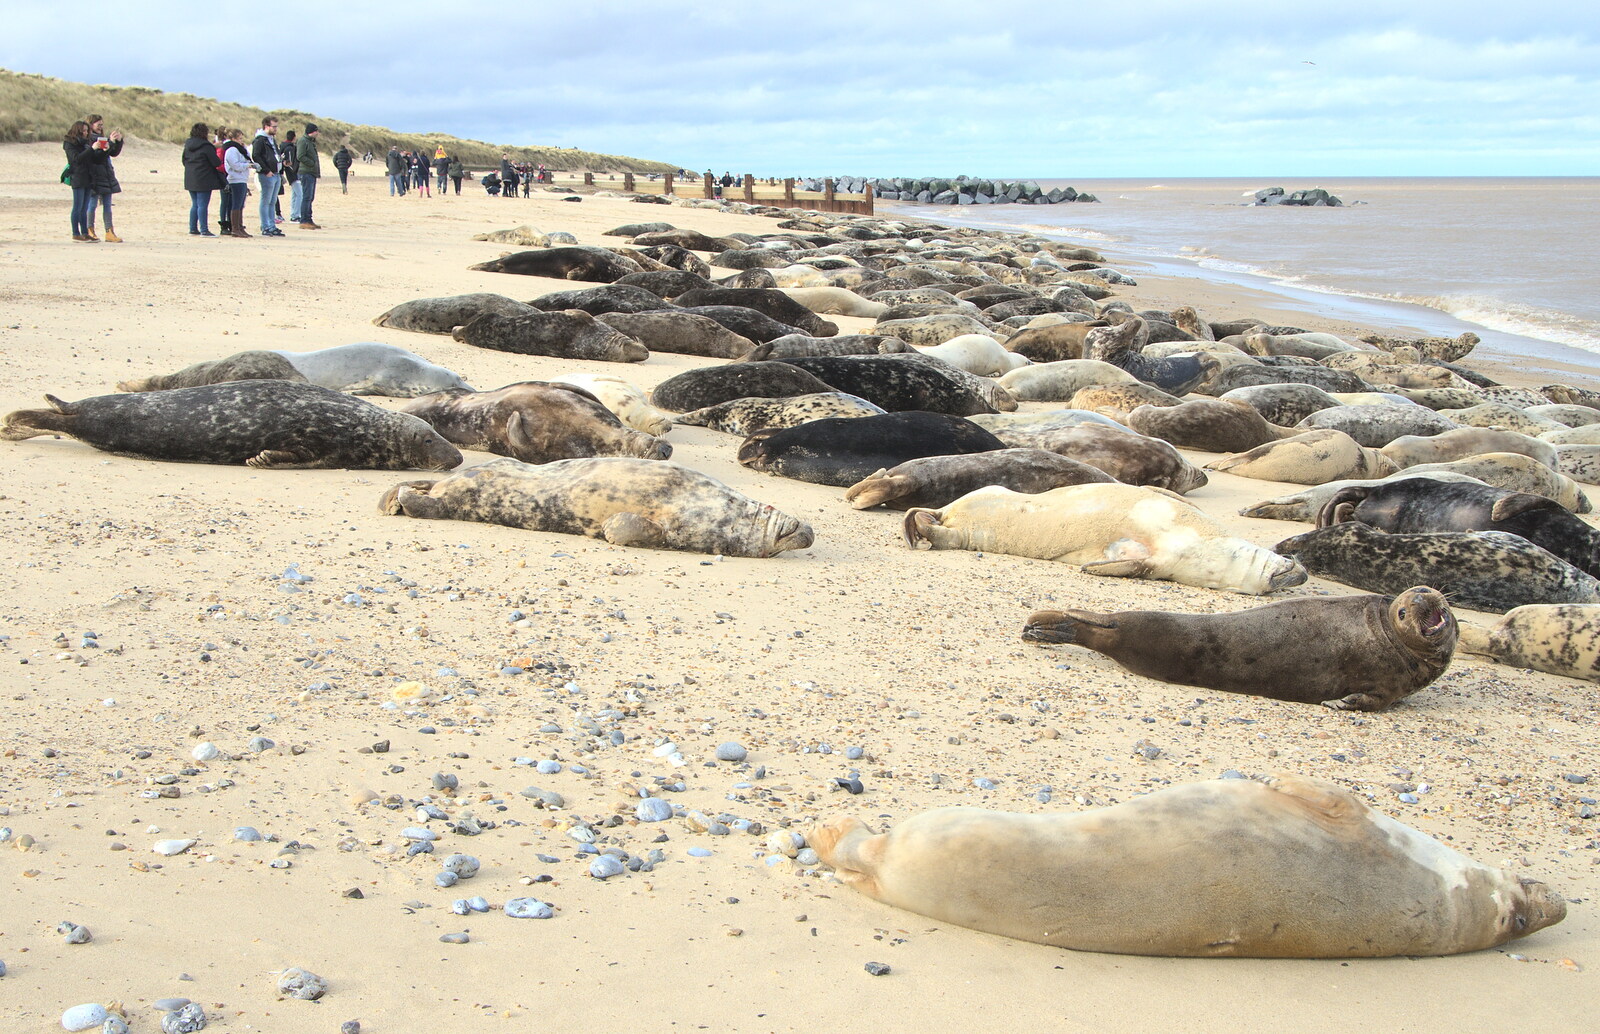 A beach-full of seals from The Seals of Horsey Gap, Norfolk - 21st February 2016